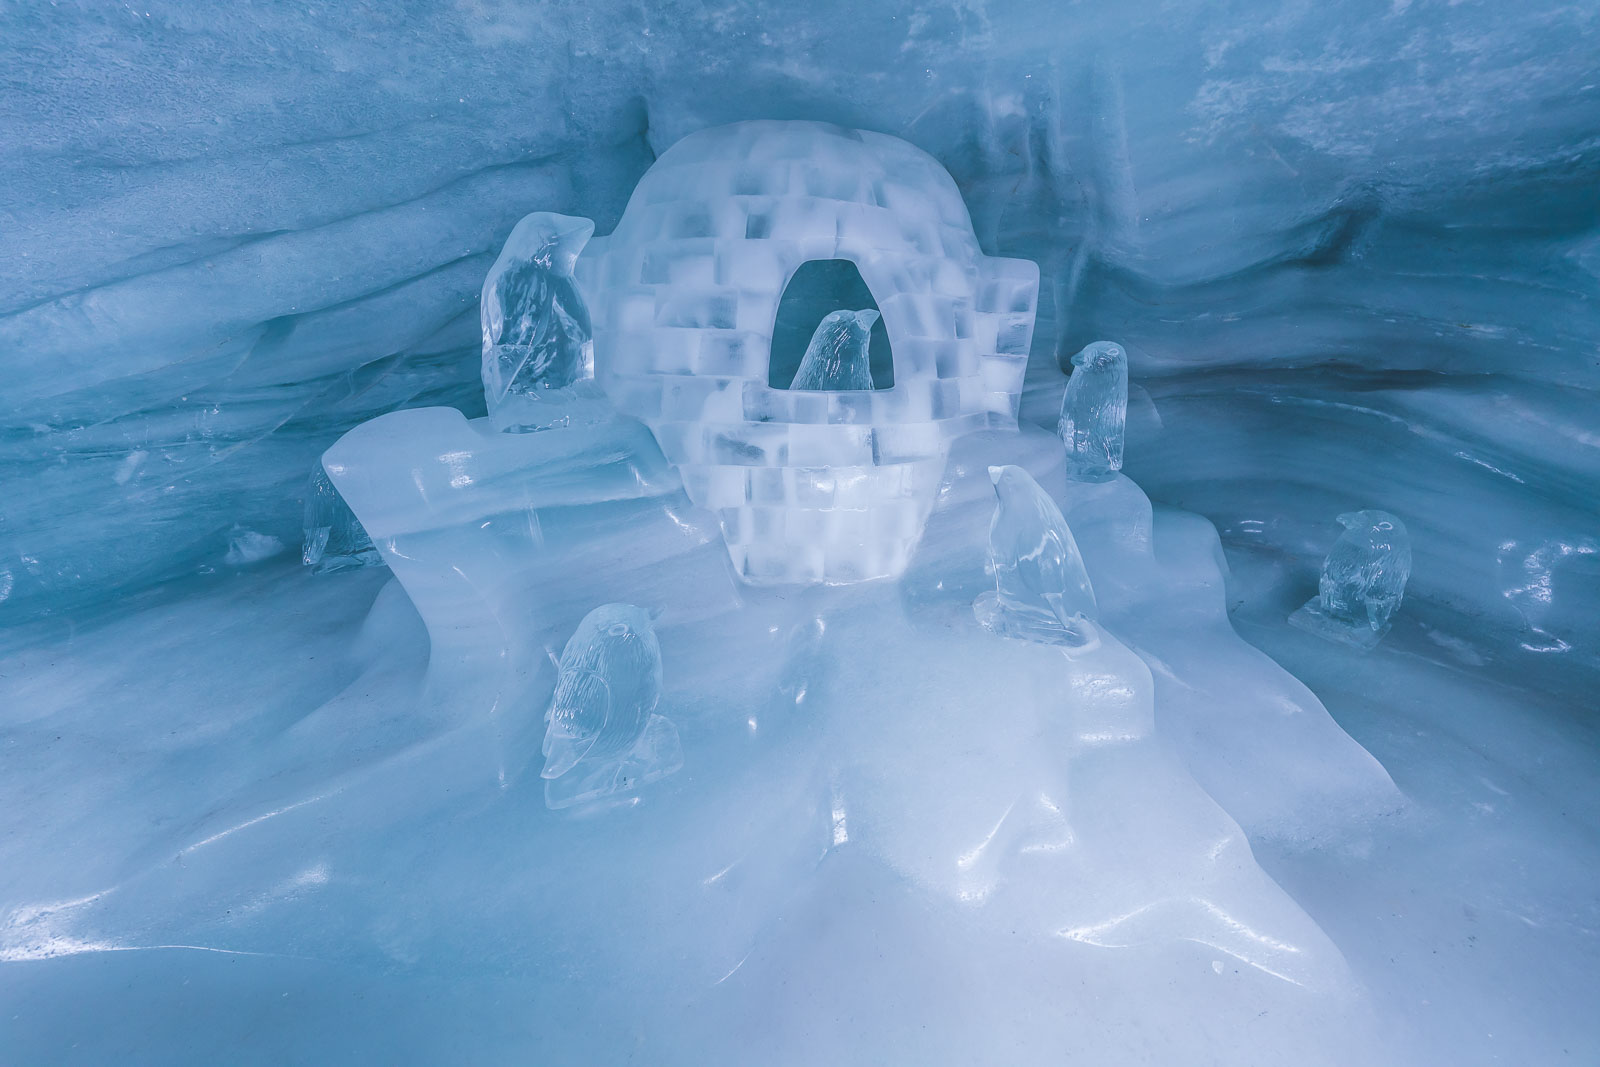 Ice Sculpture in Ice Palace at Jungfraujoch top of Europe